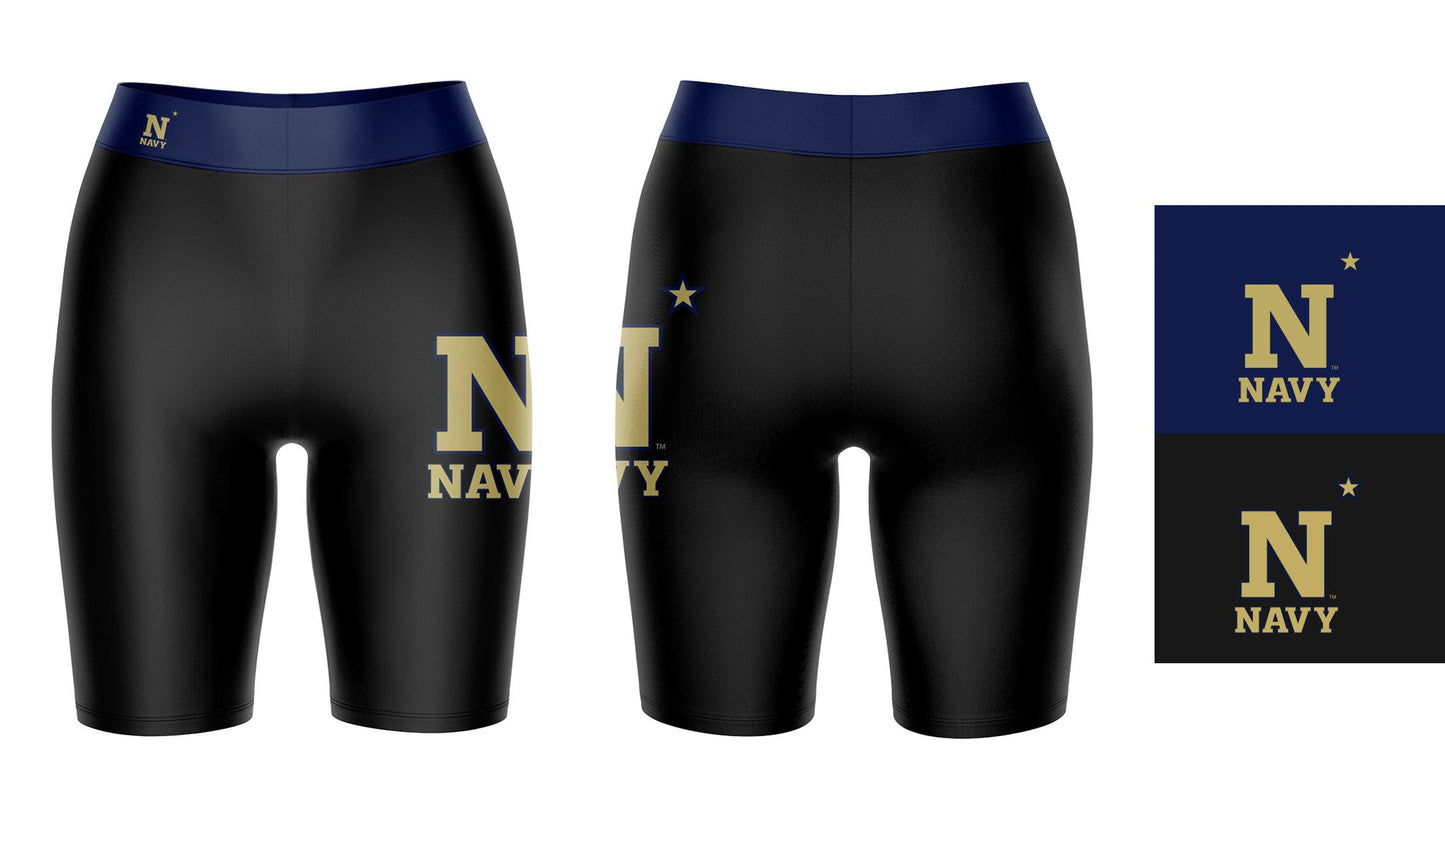 US Naval Naval Academy Vive La Fete Game Day Logo on Thigh and Waistband Black and Navy Women Bike Short 9 Inseam"